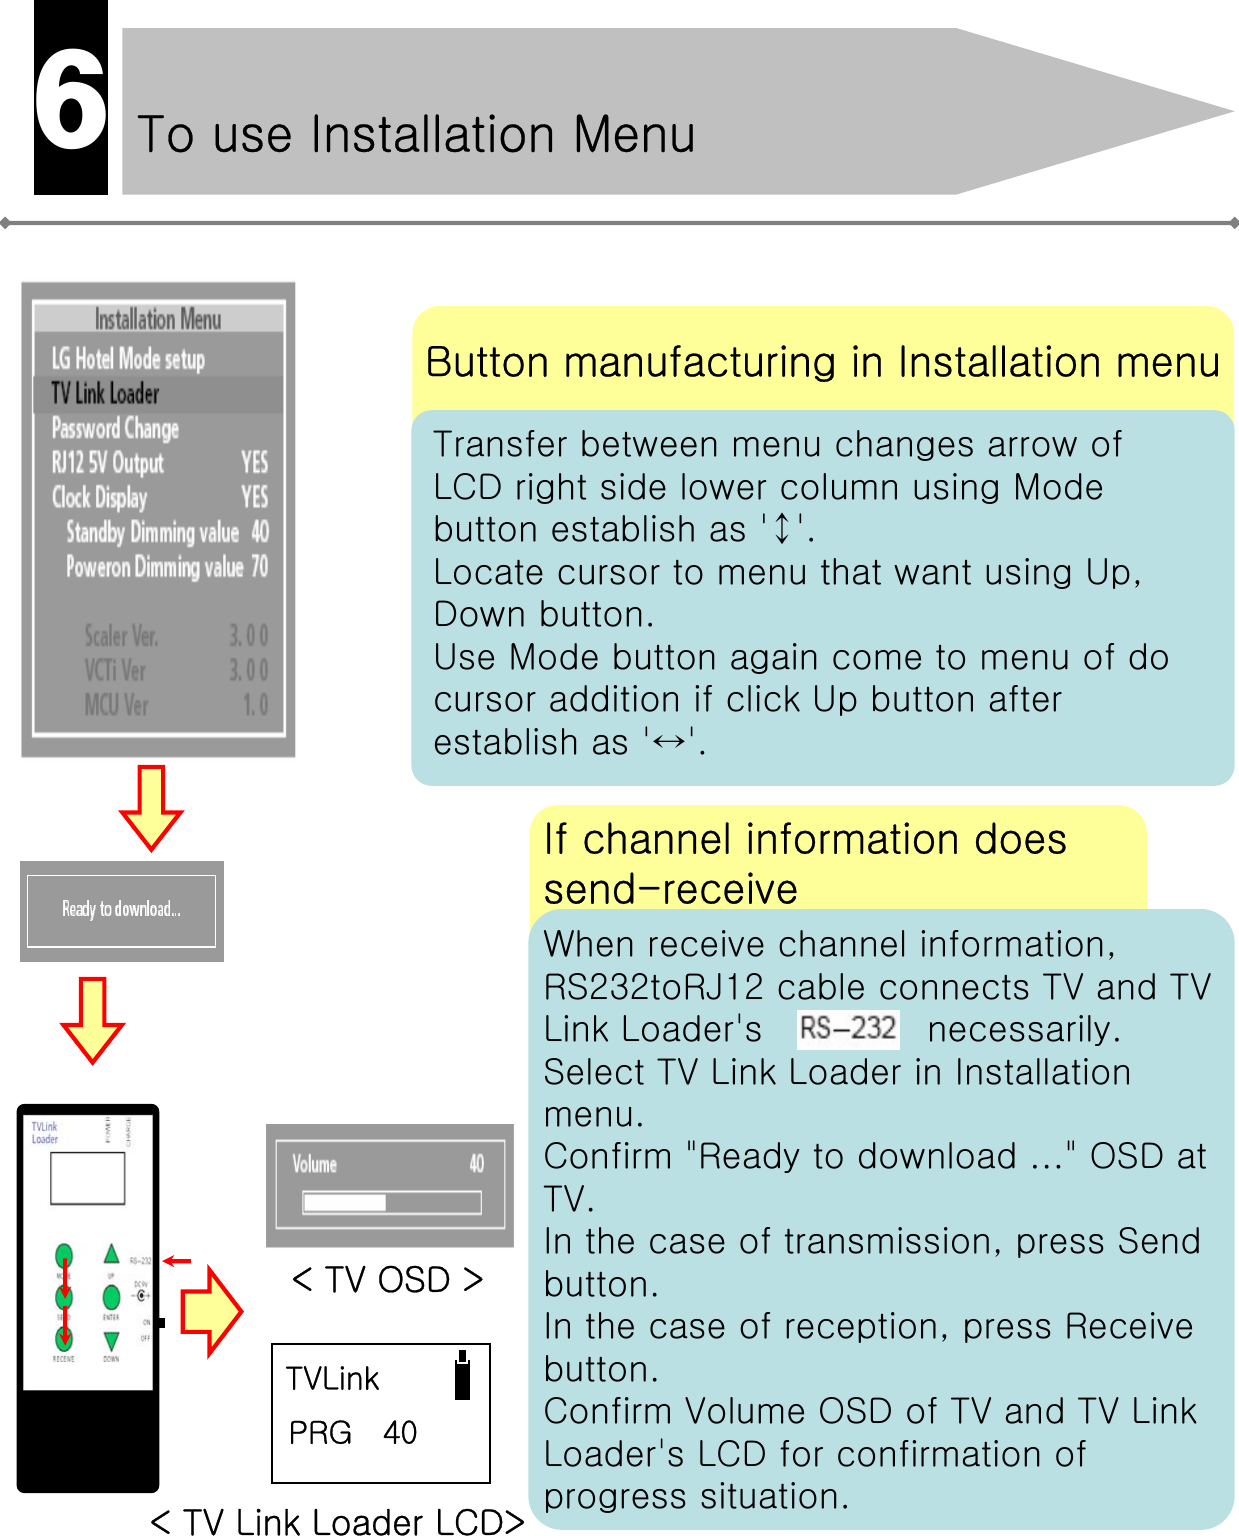 To use Installation Menu6Button manufacturing in Installation menuTransfer between menu changes arrow of LCD right side lower column using Mode button establish as &apos;↕&apos;.Locate cursor to menu that want using Up, Down button.Use Mode button again come to menu of do cursor addition if click Up button after establish as &apos;↔&apos;.If channel information does send-receiveWhen receive channel information, RS232toRJ12 cable connects TV and TV Link Loader&apos;s  necessarily.Select TV Link Loader in Installation menu.Confirm &quot;Ready to download ...&quot; OSD at TV.In the case of transmission, press Send button.In the case of reception, press Receive button.Confirm Volume OSD of TV and TV Link Loader&apos;s LCD for confirmation of progress situation.TVLinkPRG   40&lt; TV OSD &gt;&lt; TV Link Loader LCD&gt;